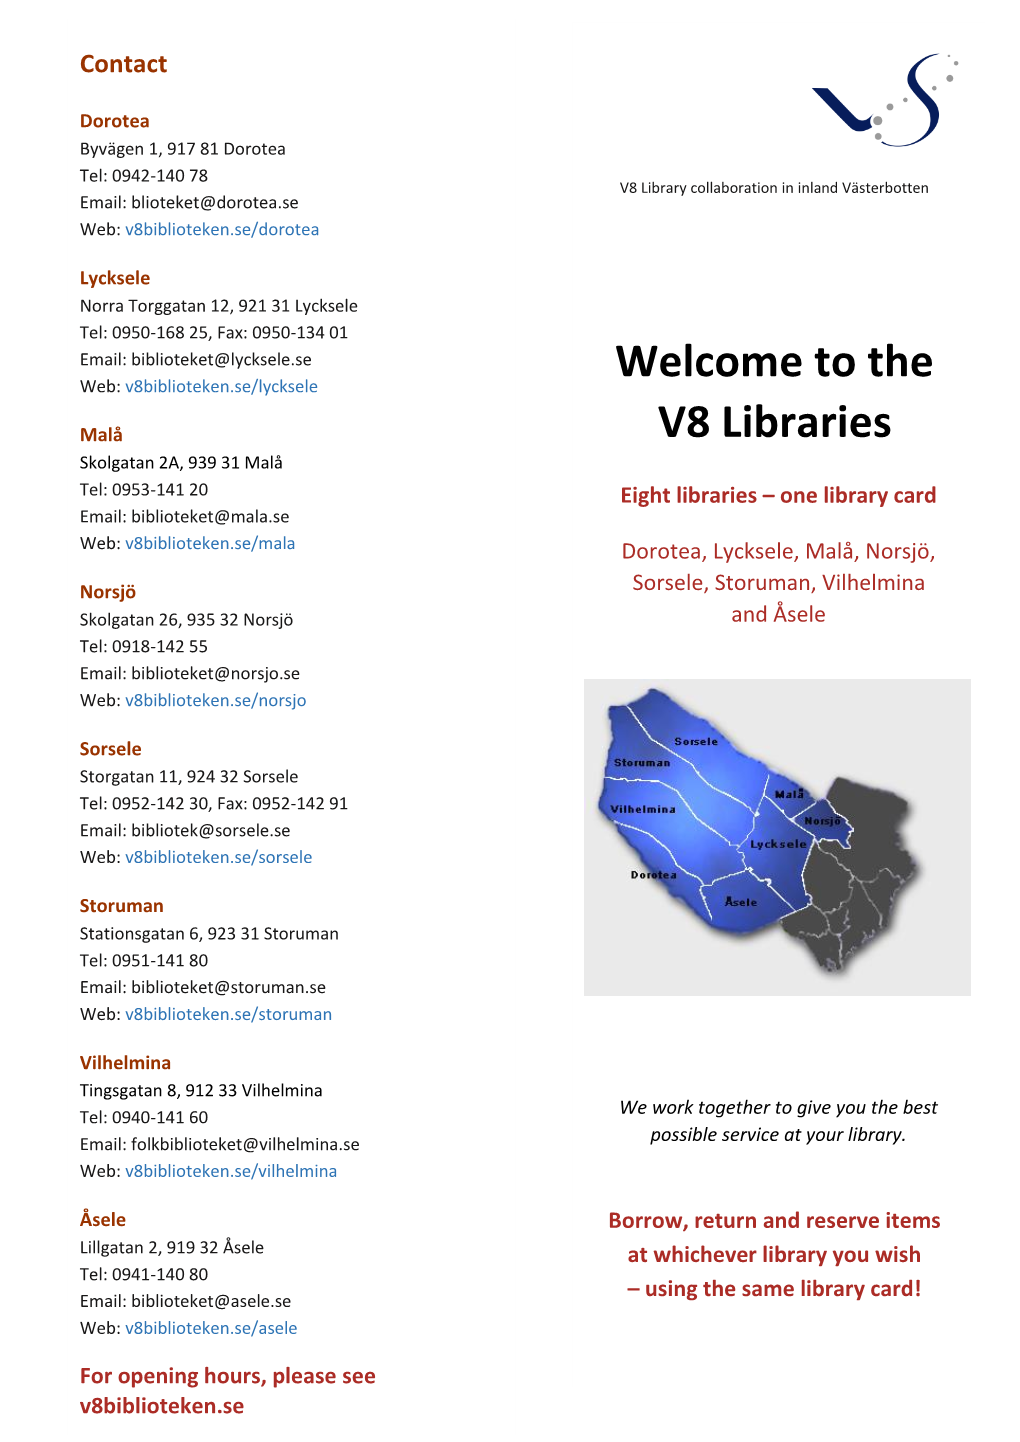 The V8 Libraries